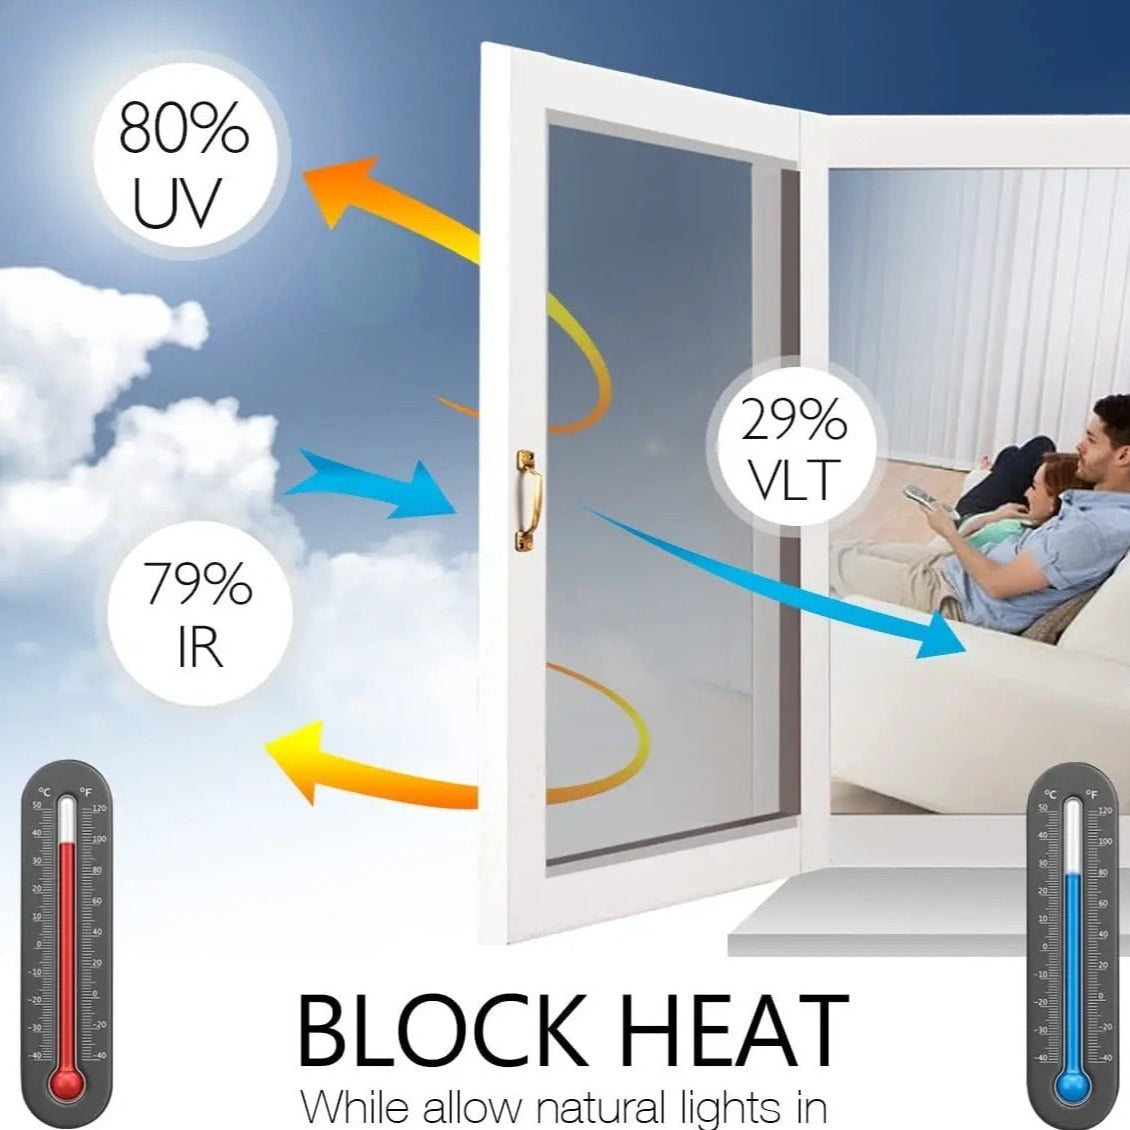 Window Privacy Film is Sticked On the Windows and the Family Enjoys By Blocking Heat.